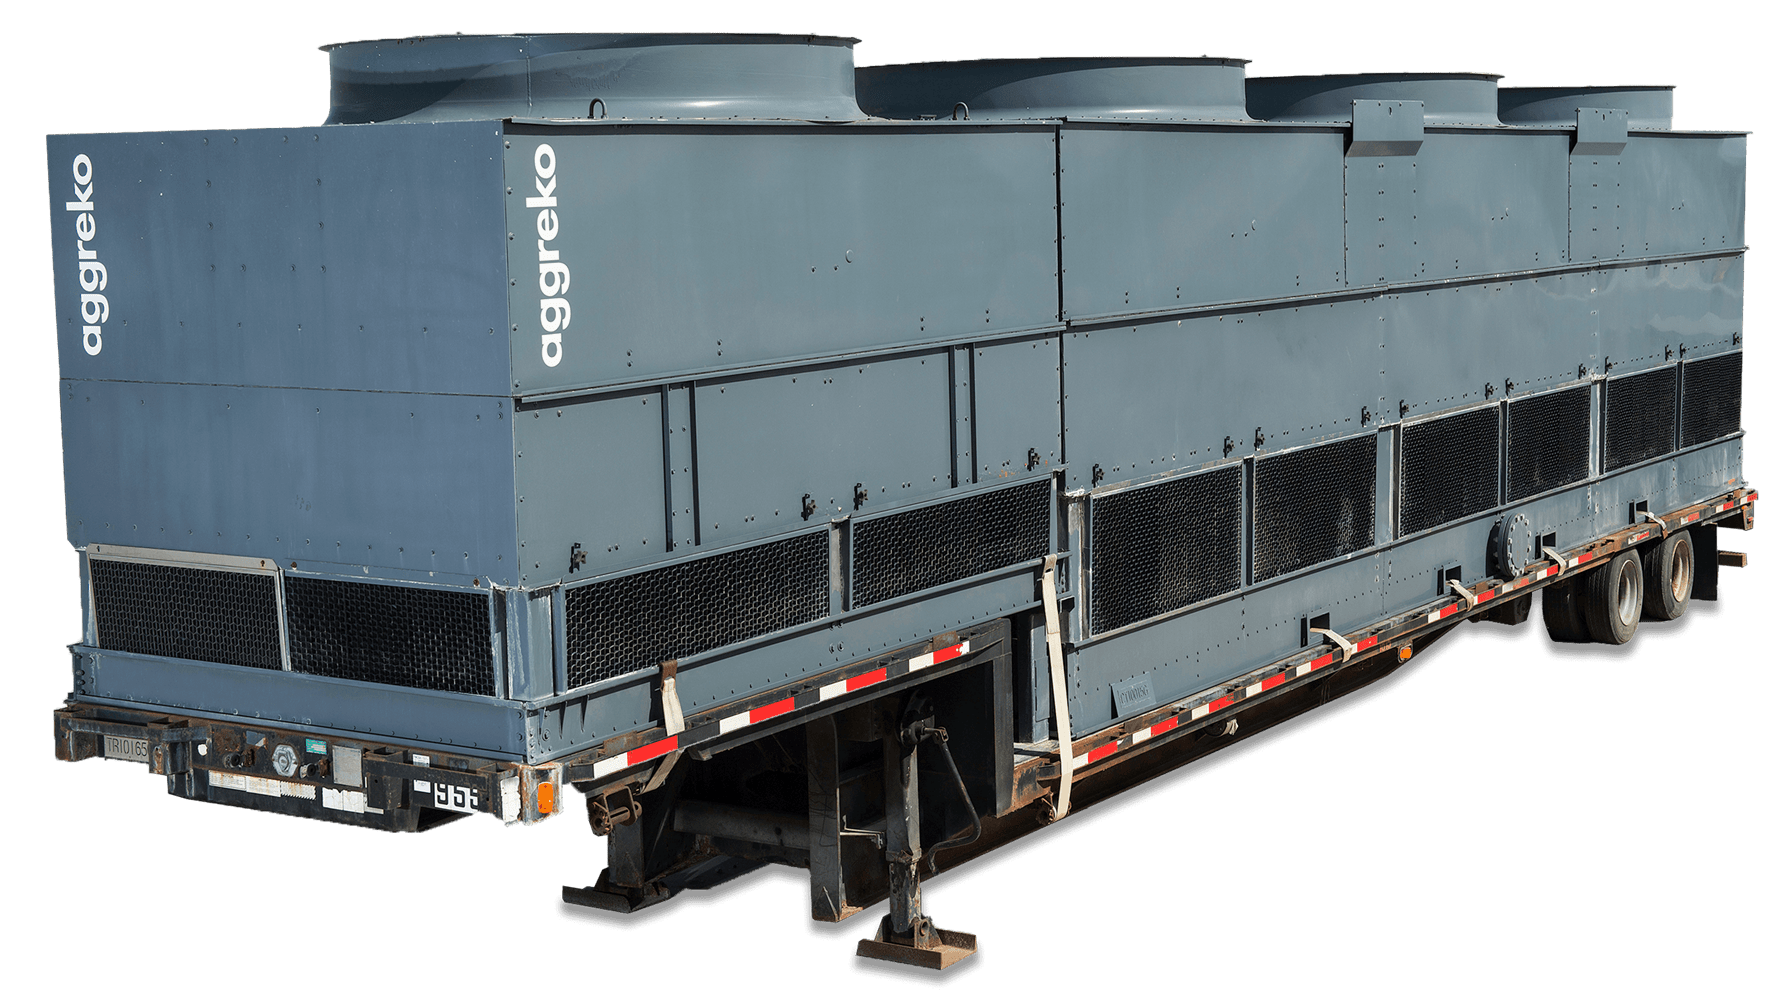 Cooling Tower 1000 ton Commercial Evaporative-1-lg